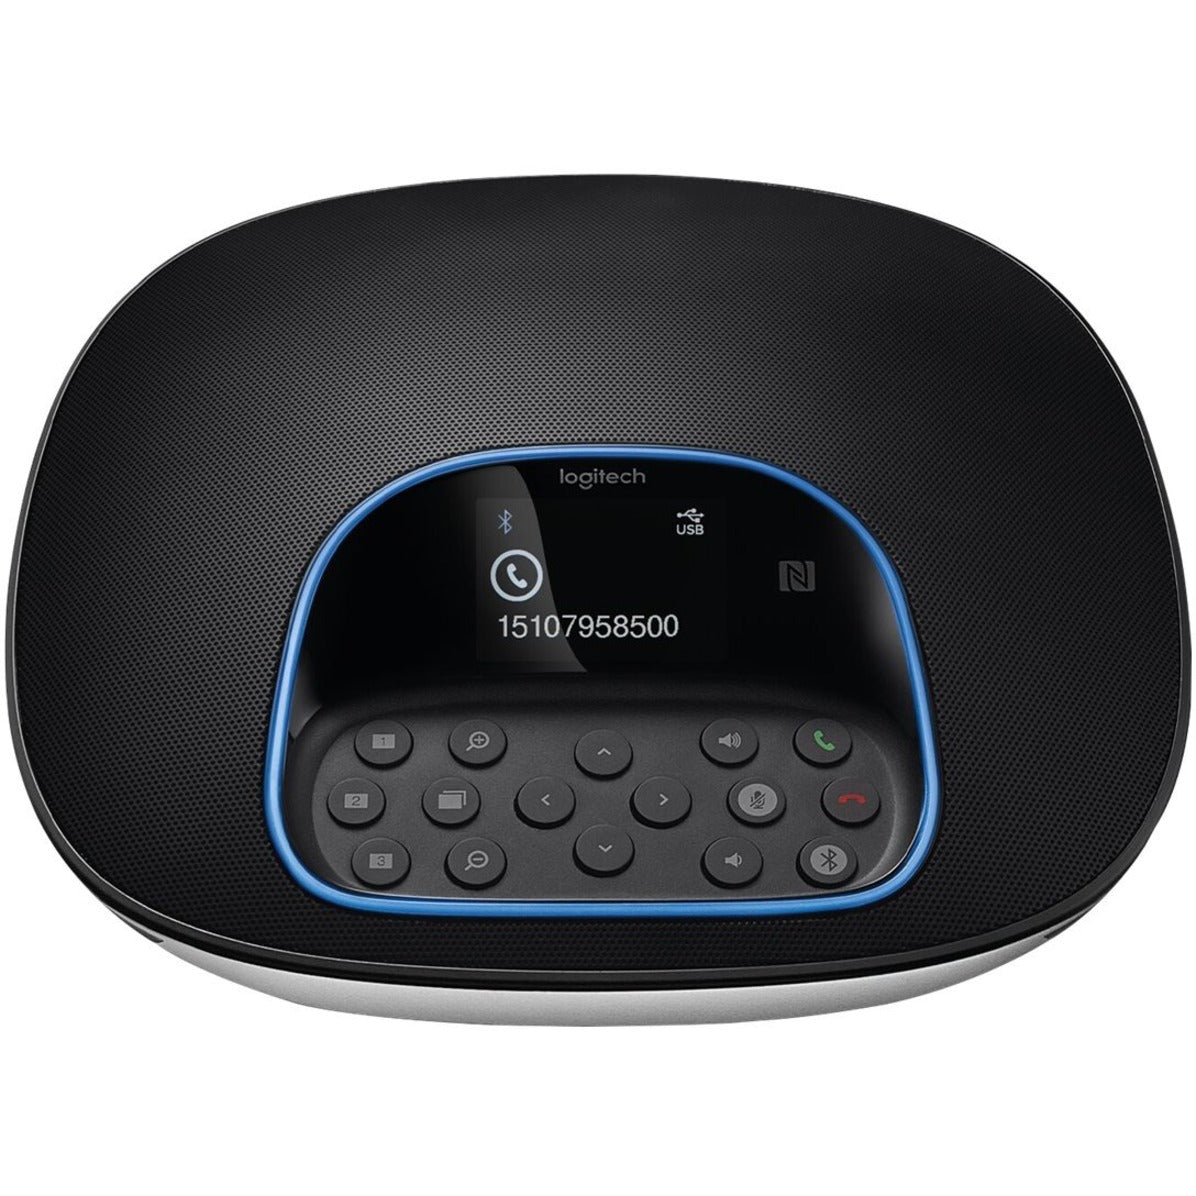 Logitech 960-001054 GROUP Video Conferencing System, 2 Year Warranty, 30 fps, 1920 x 1080, USB